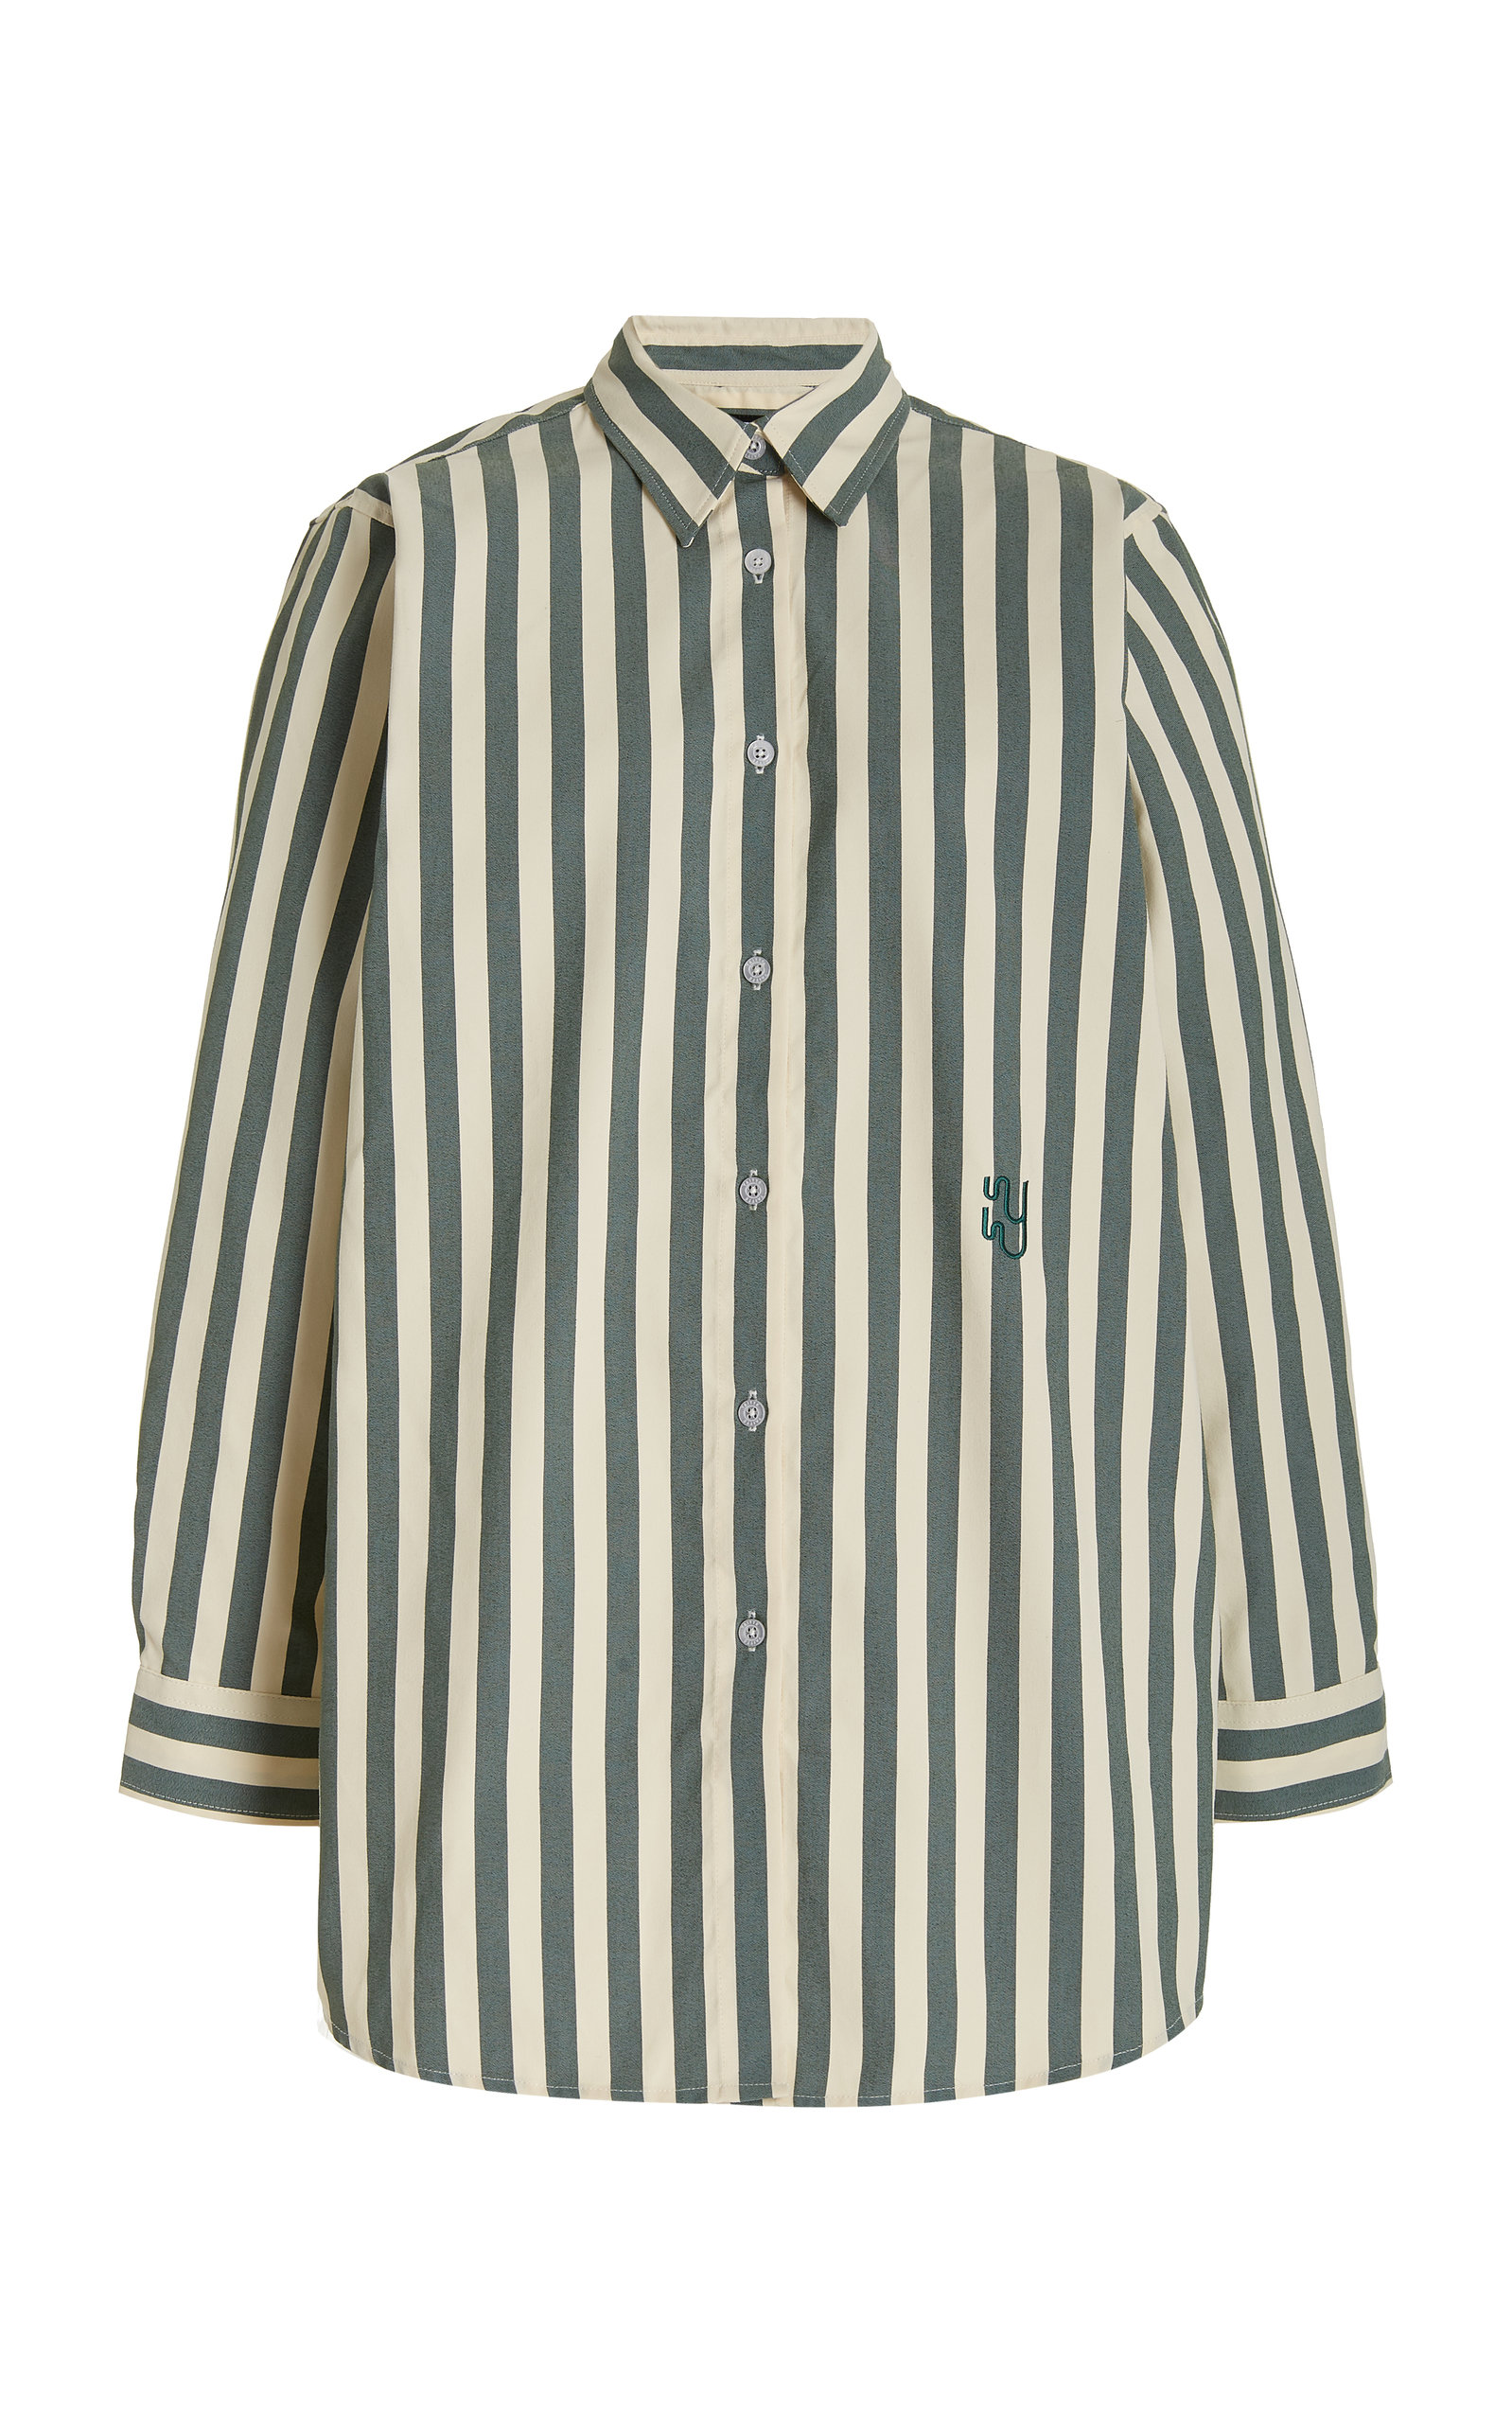 Exclusive Buoy Striped Shirt